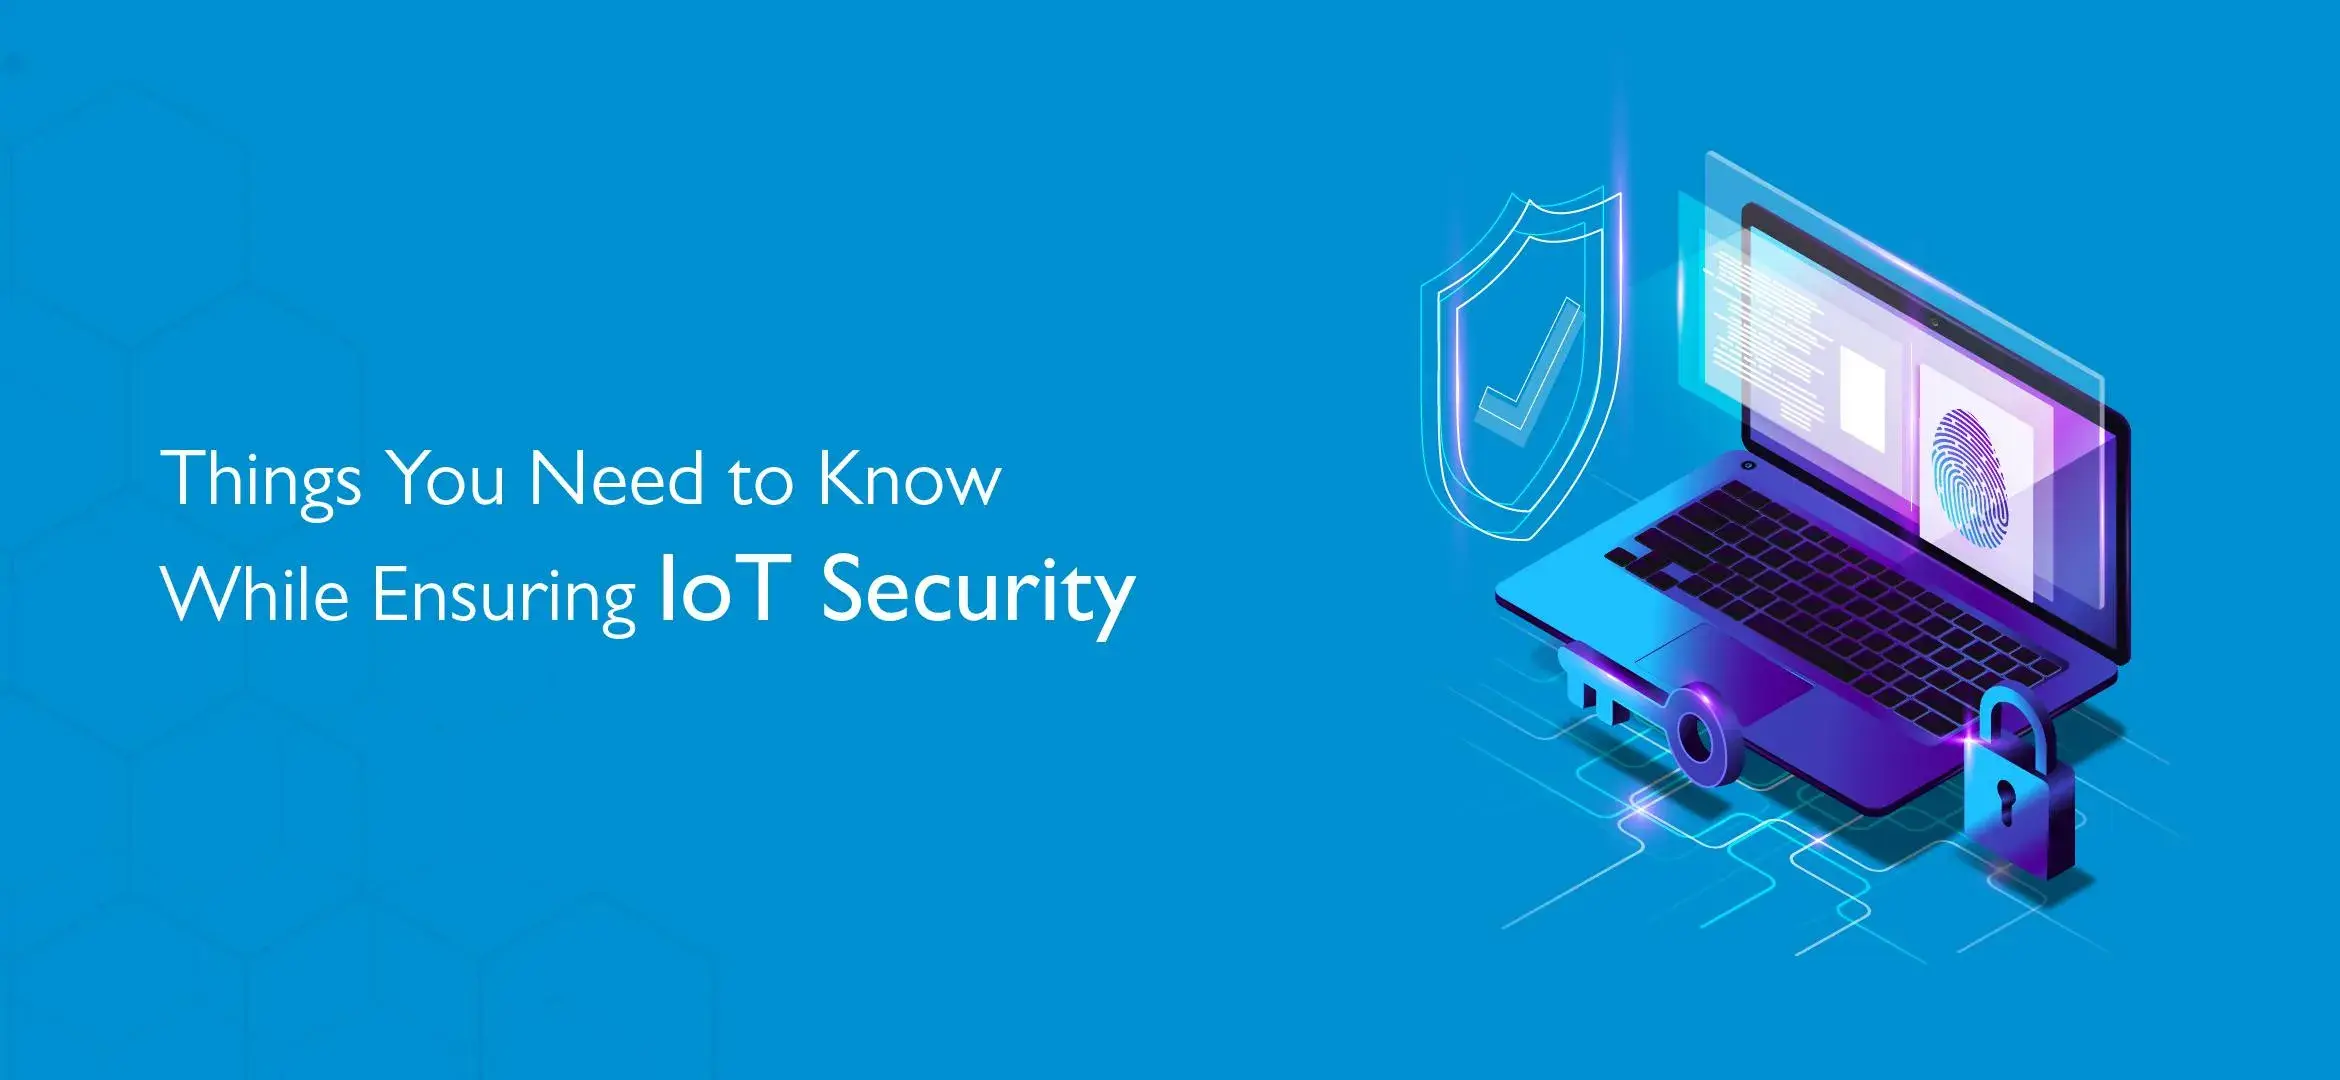 Things You Need to Know While Ensuring IoT Security